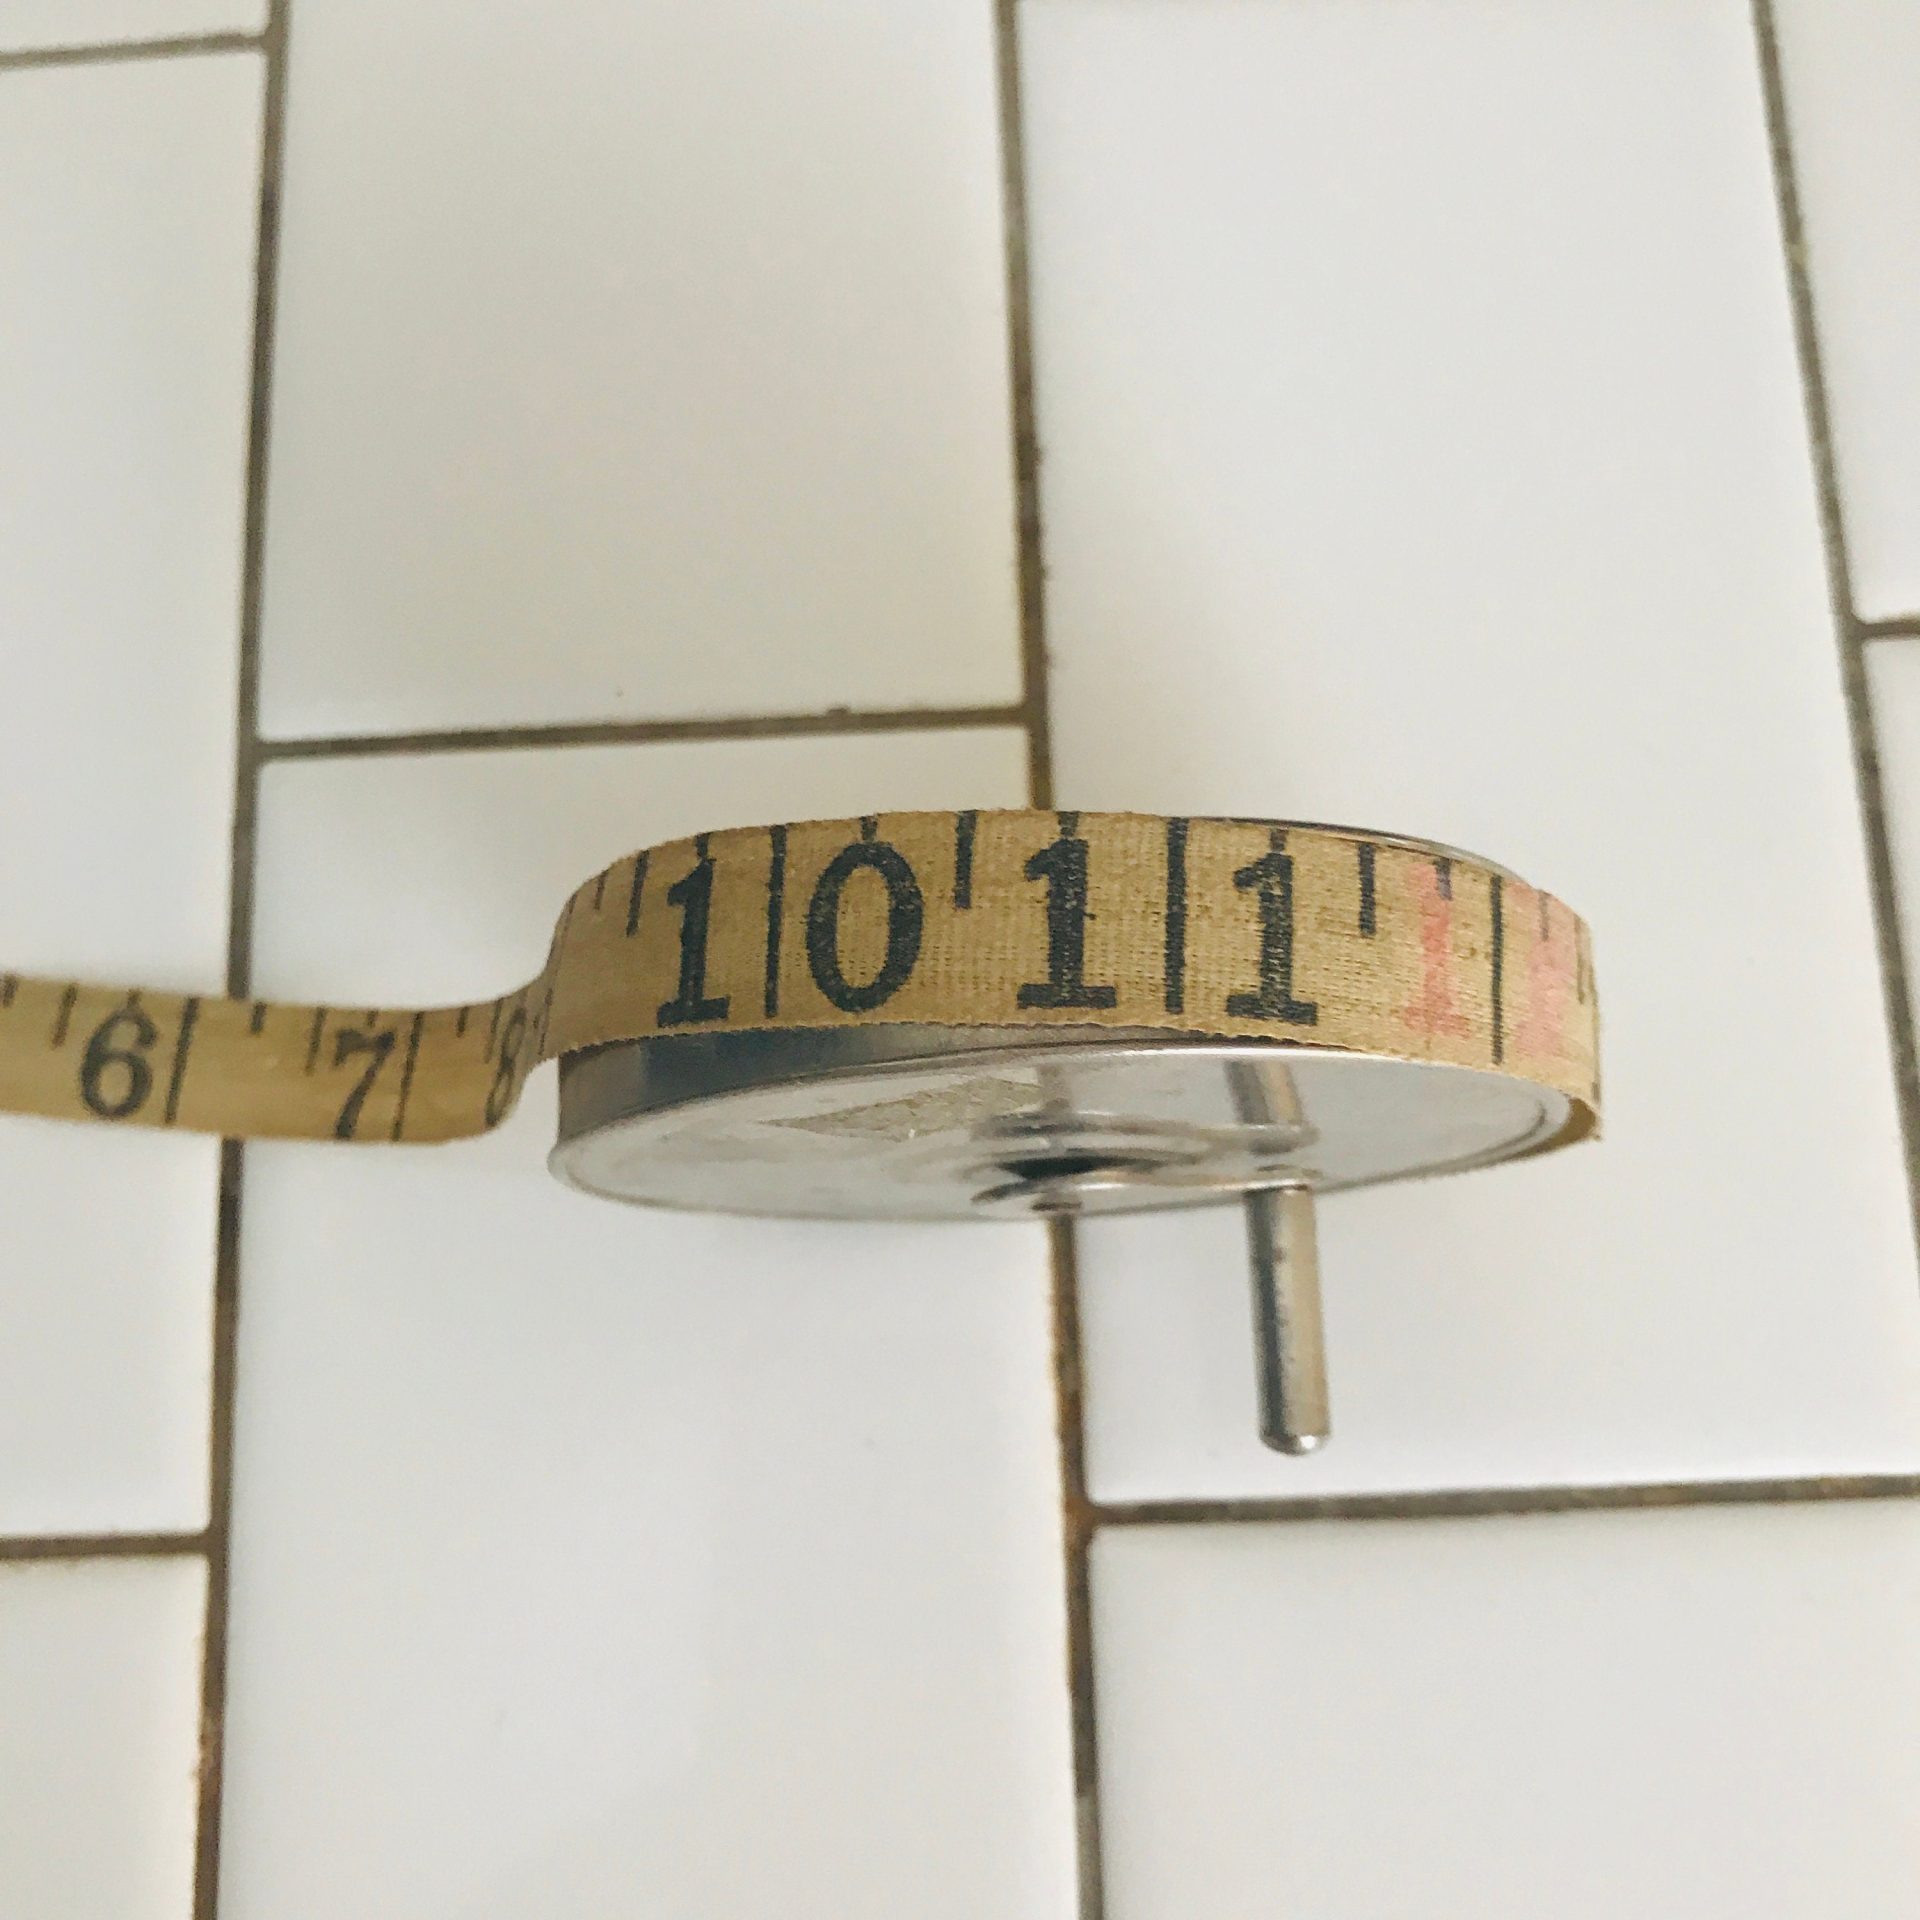 https://www.truevintageantiques.com/wp-content/uploads/2022/02/vintage-tape-measure-cloth-sewing-notions-1920s-wind-up-tape-measurecollectible-display-metal-6204747b4-scaled.jpg